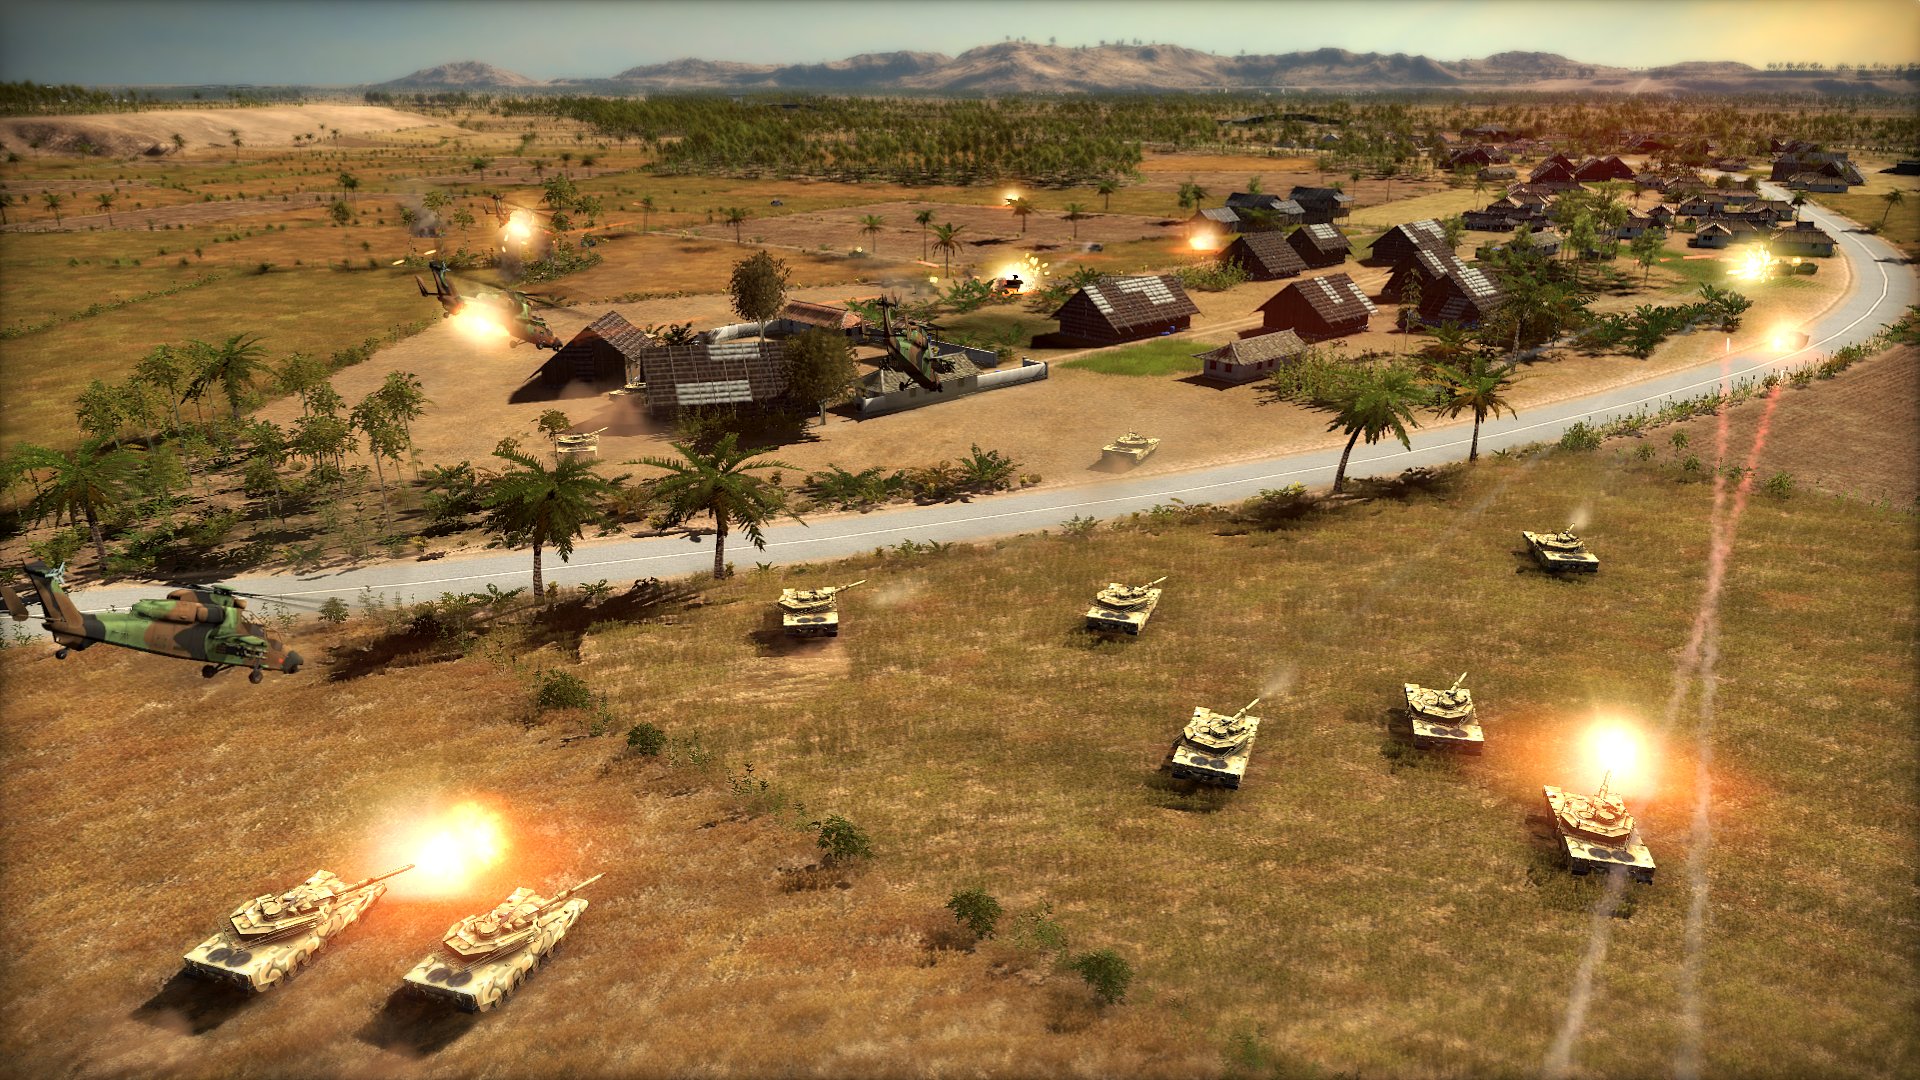 wargame, Game, Video, Military, War, Battle, Wwll, Air, Force, Fighter, Jet, Warplane, Plane, Aircraft, Action, Fighting, Combat, Flight, Simulator, Mmo, Online, Shooter, Weapon, Tank, Strategy Wallpaper